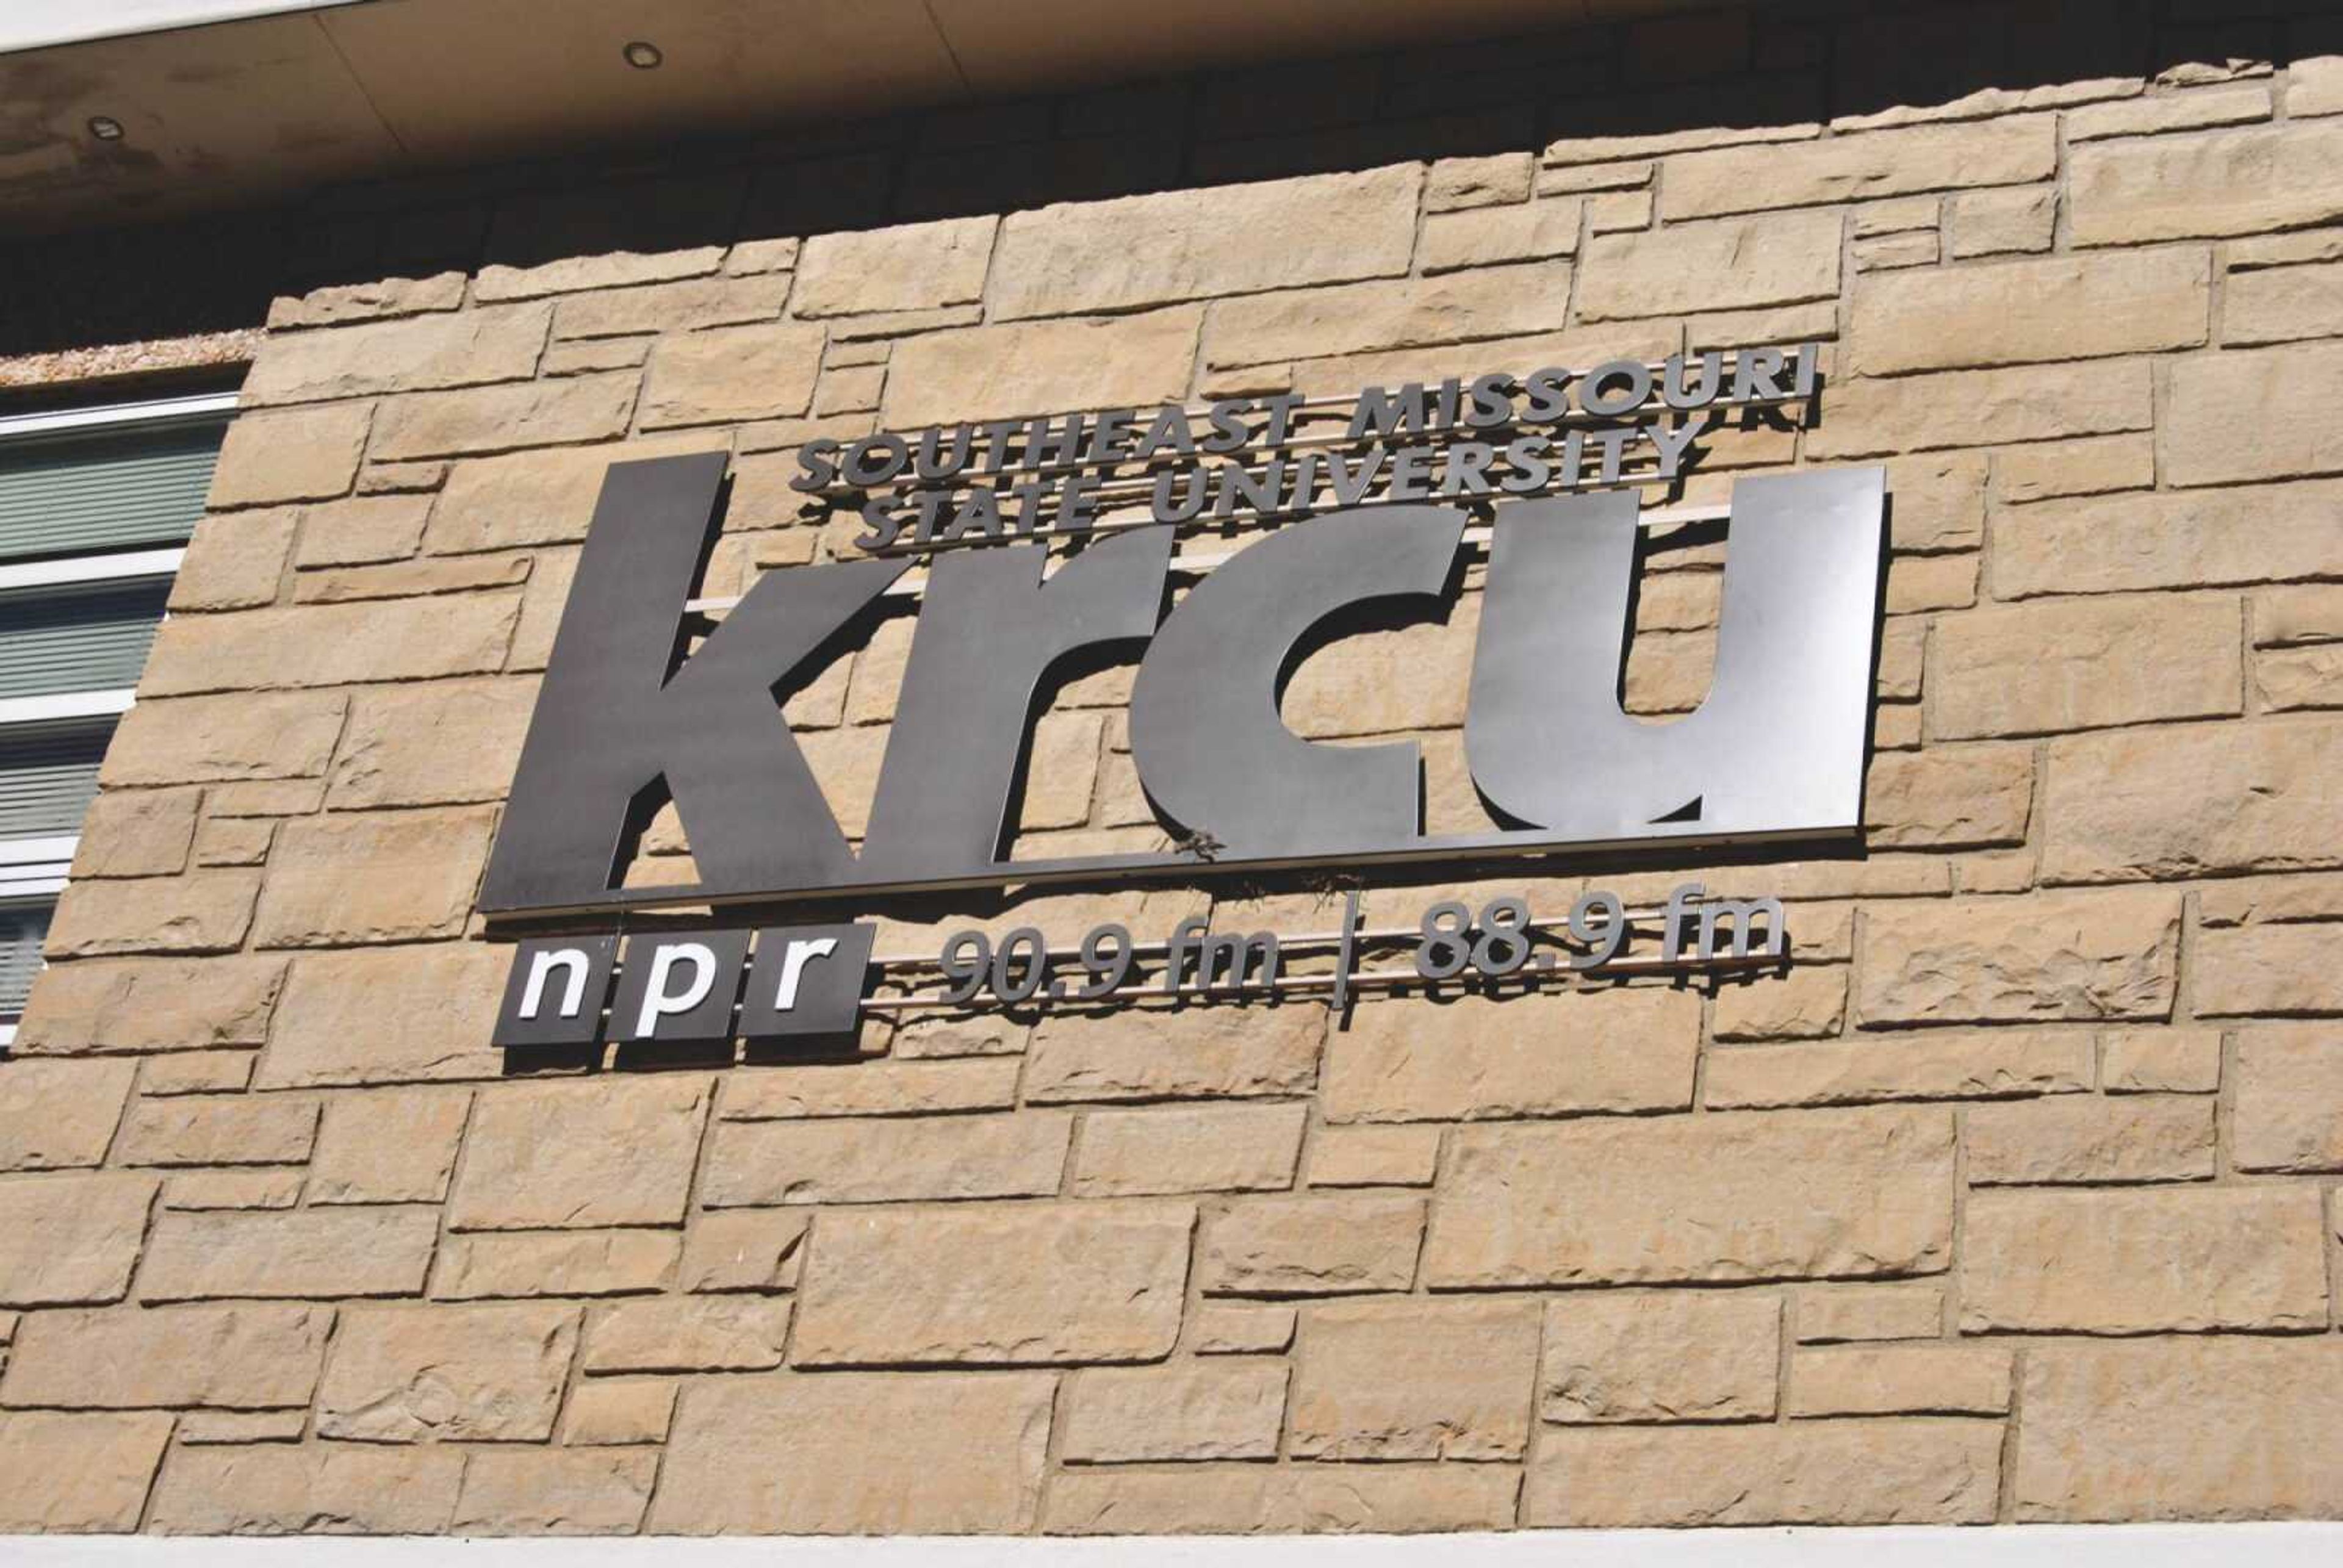 KRCU is located on Southeast Missouri State University's campus in Serena building.